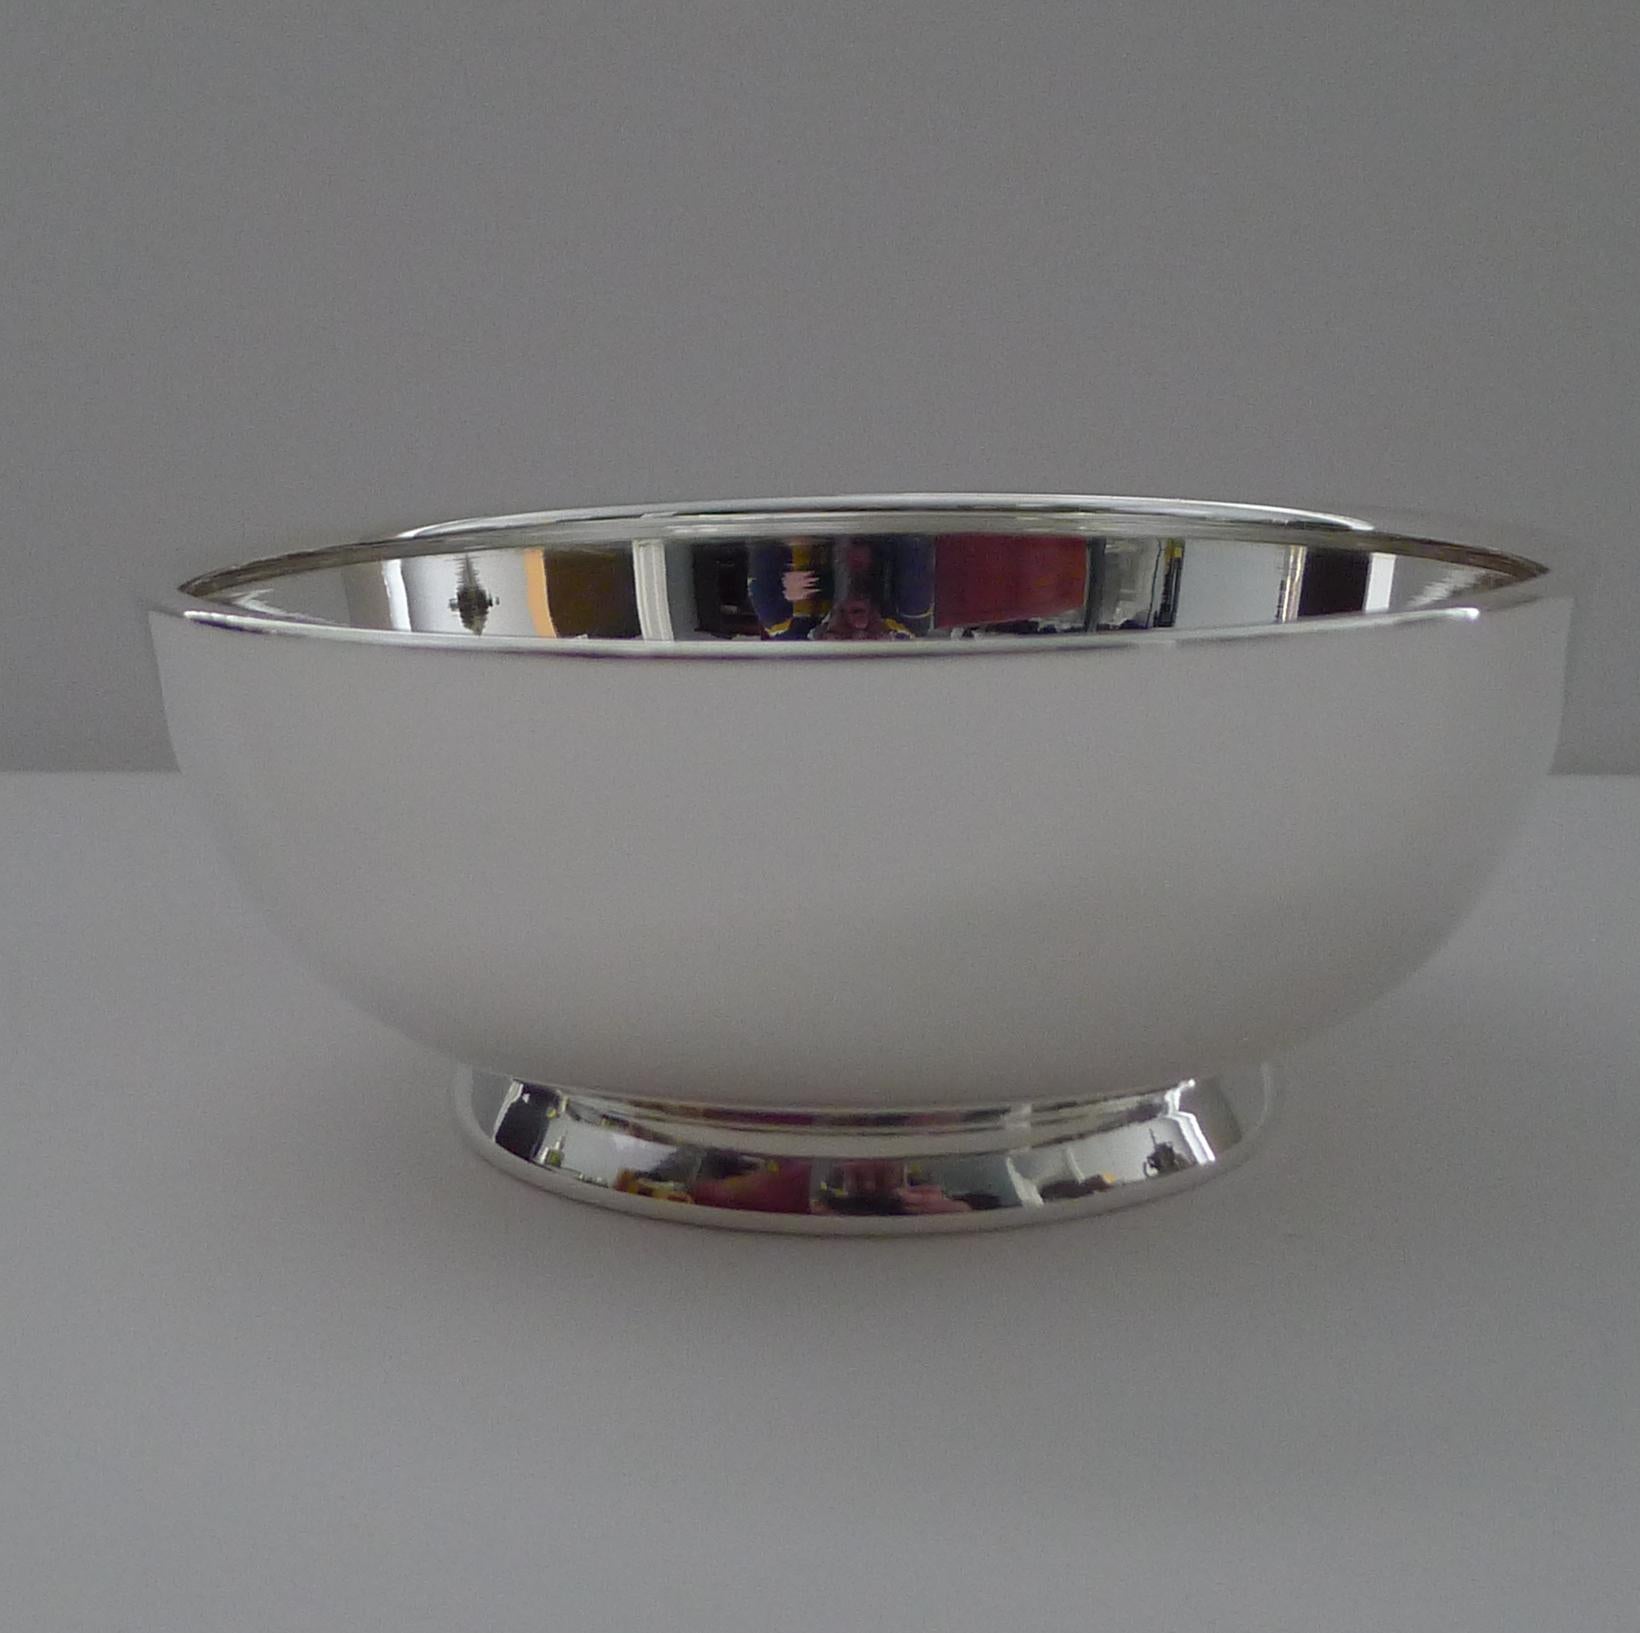 A stunning vintage (c.1980) solid silver / sterling bowl signed on the underside 